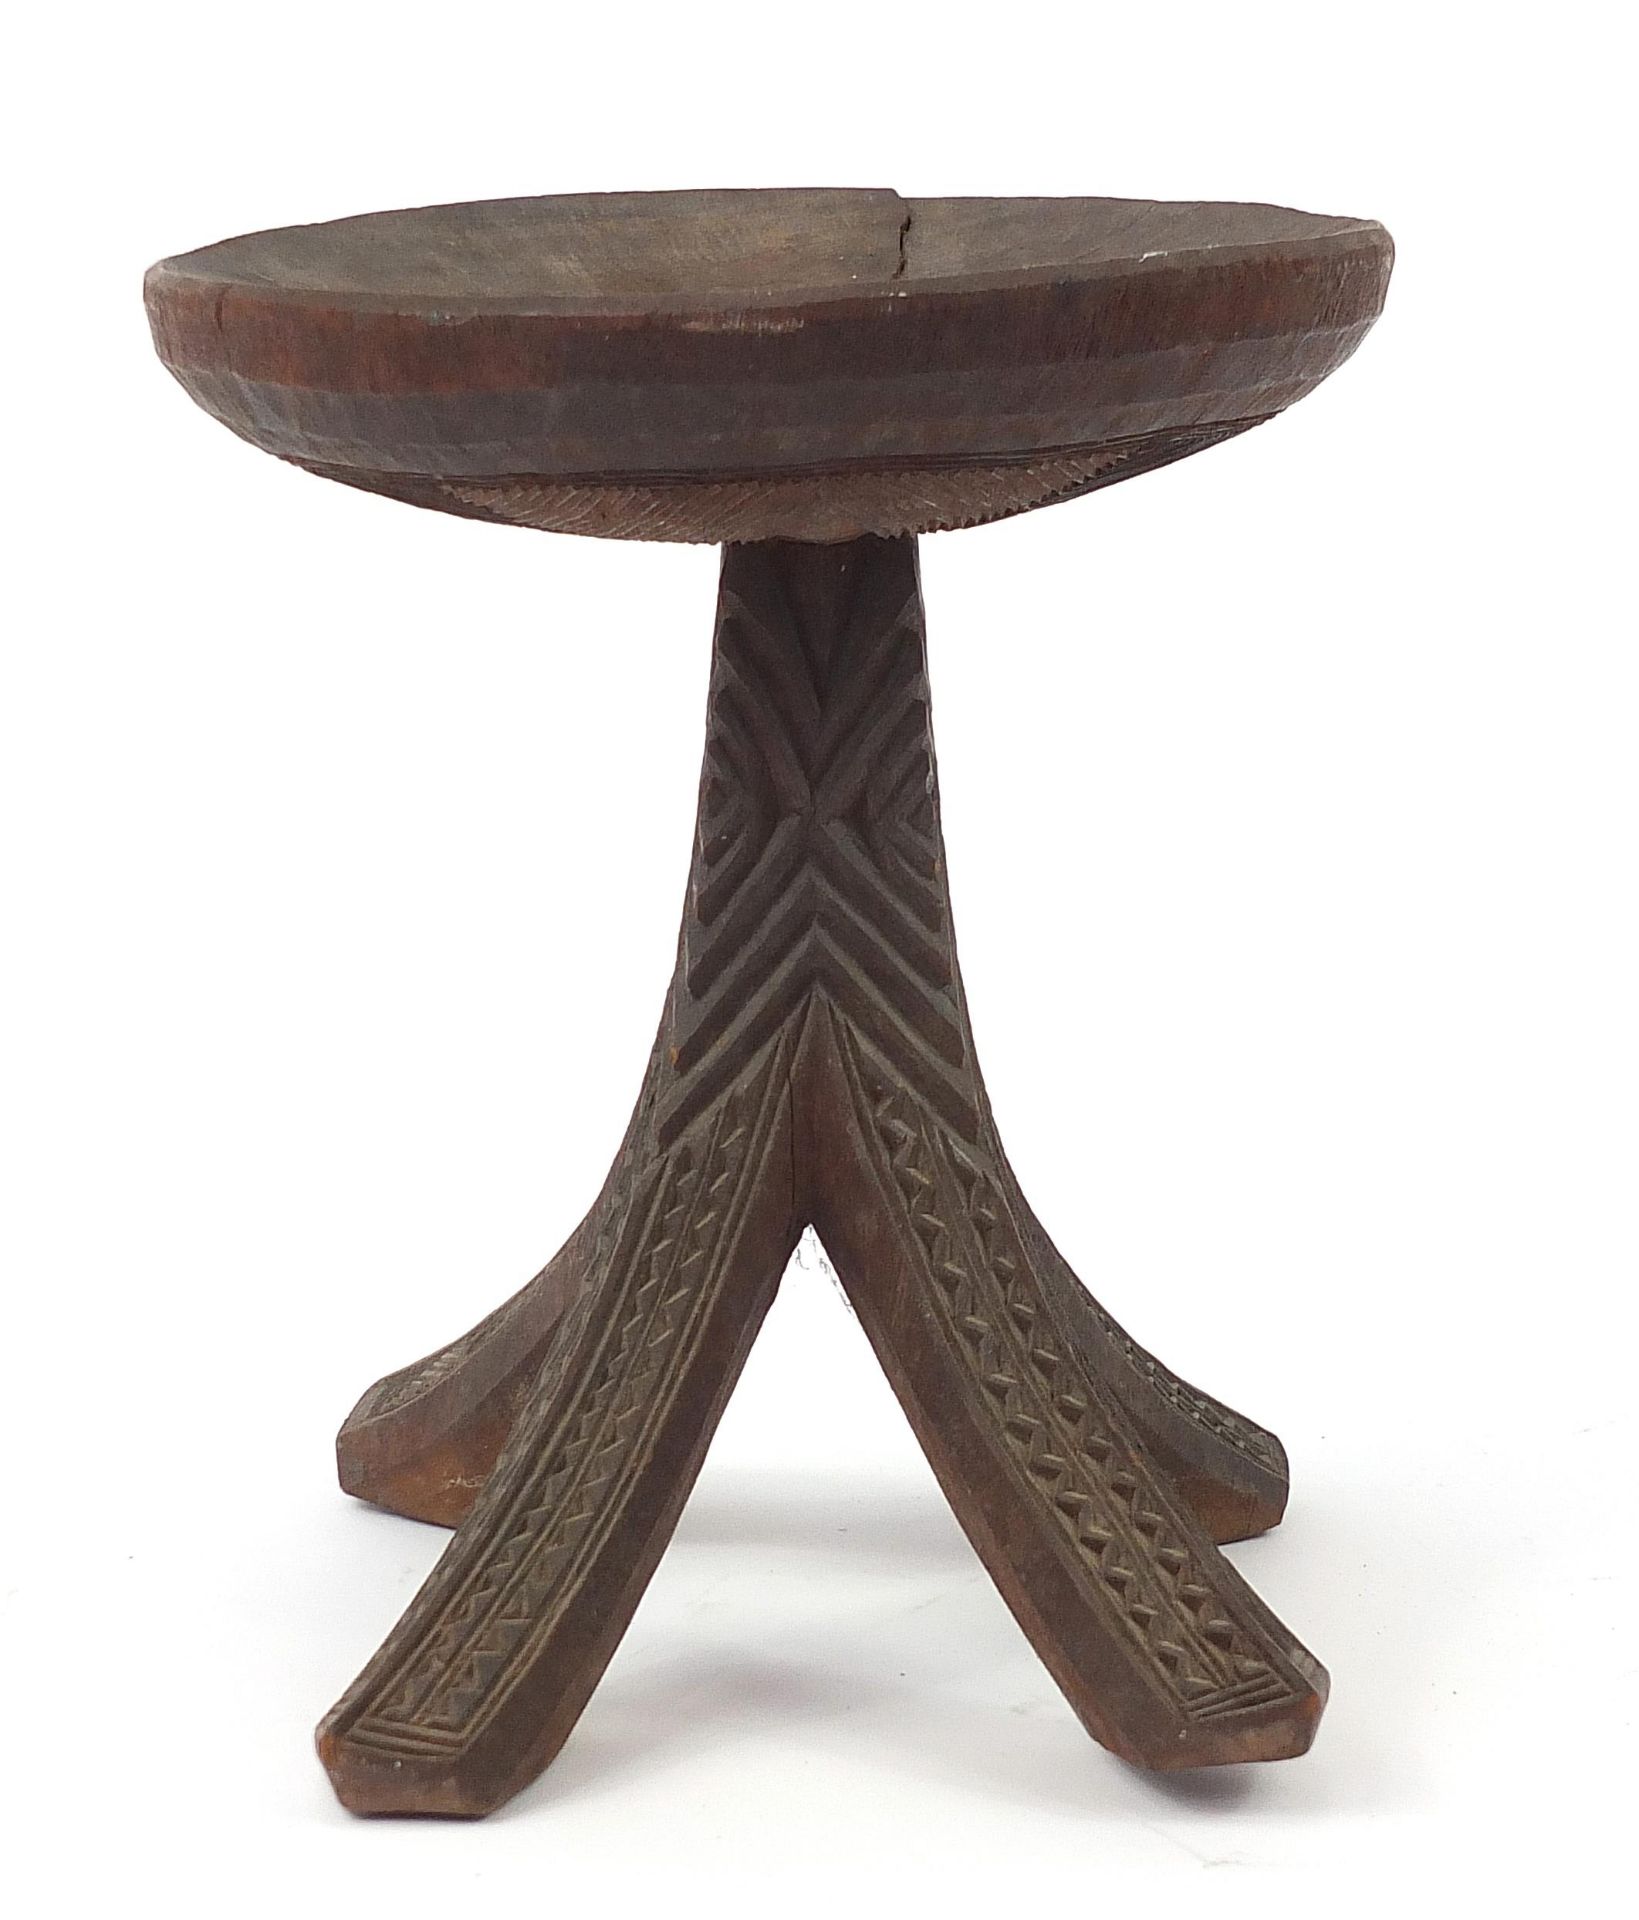 African tribal interest carved stool, 34cm high x 31cm in diameter - Image 3 of 4